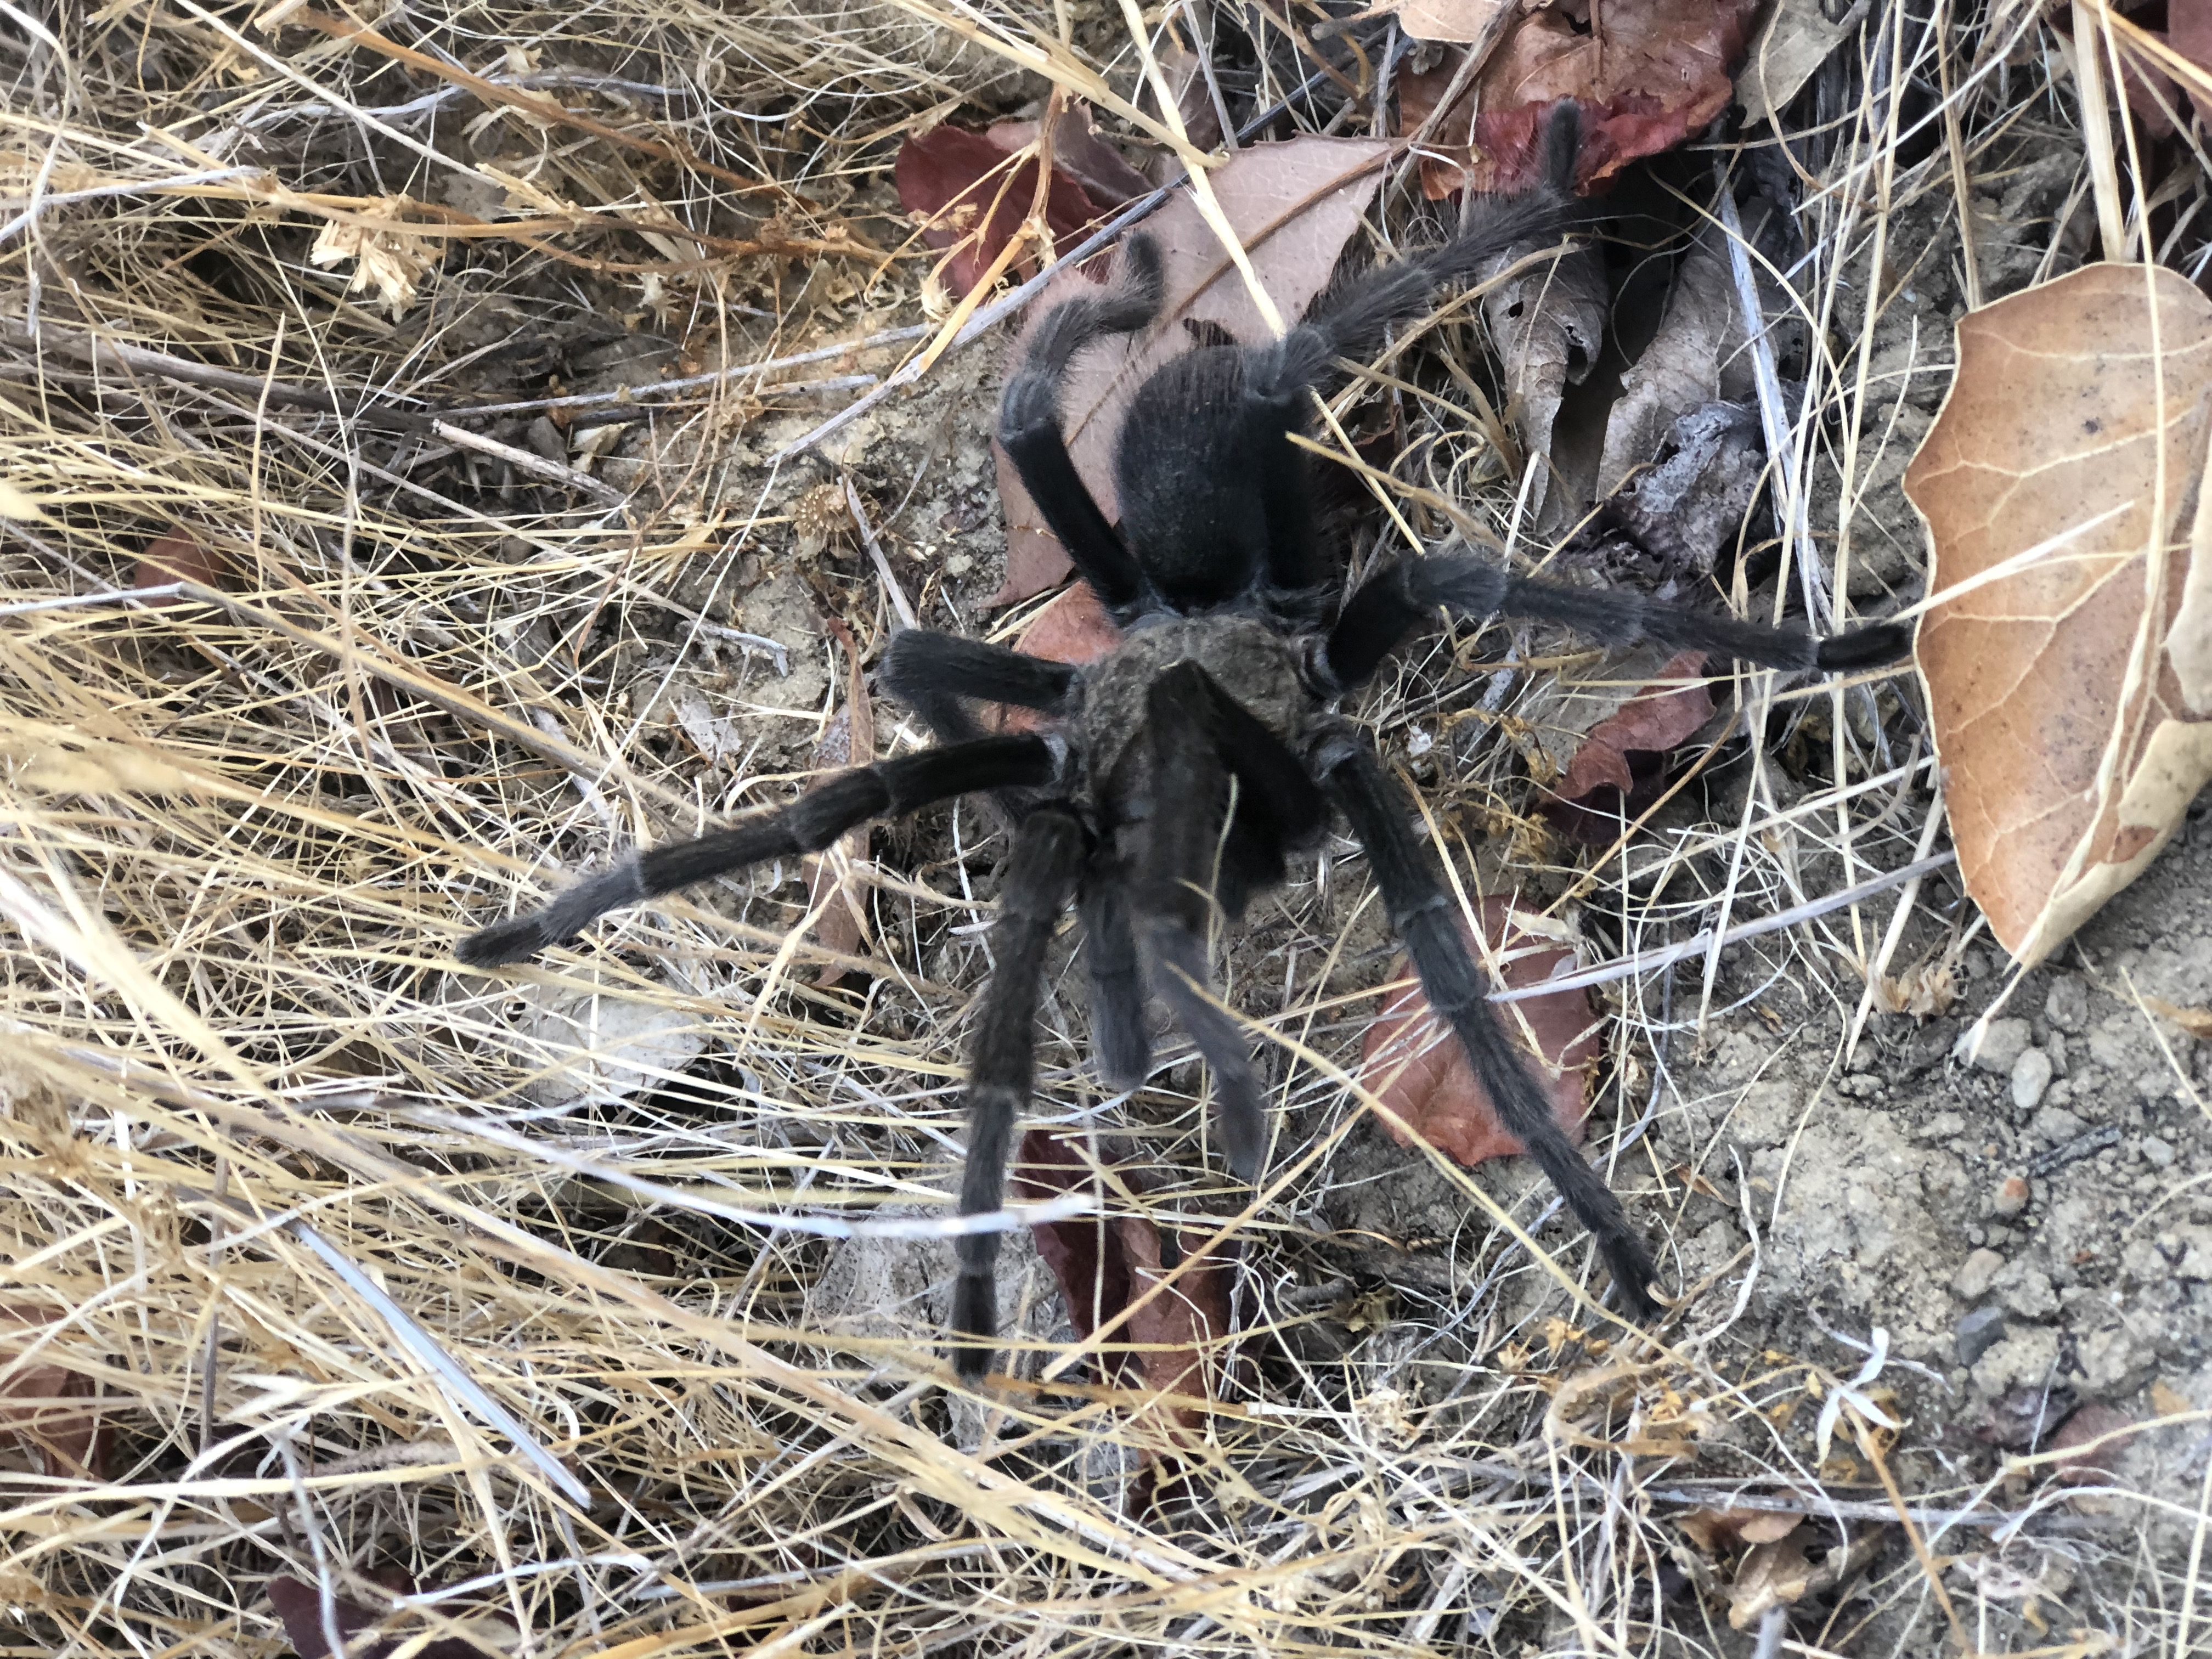 Tarantula hikes teach youth about the large, docile spiders